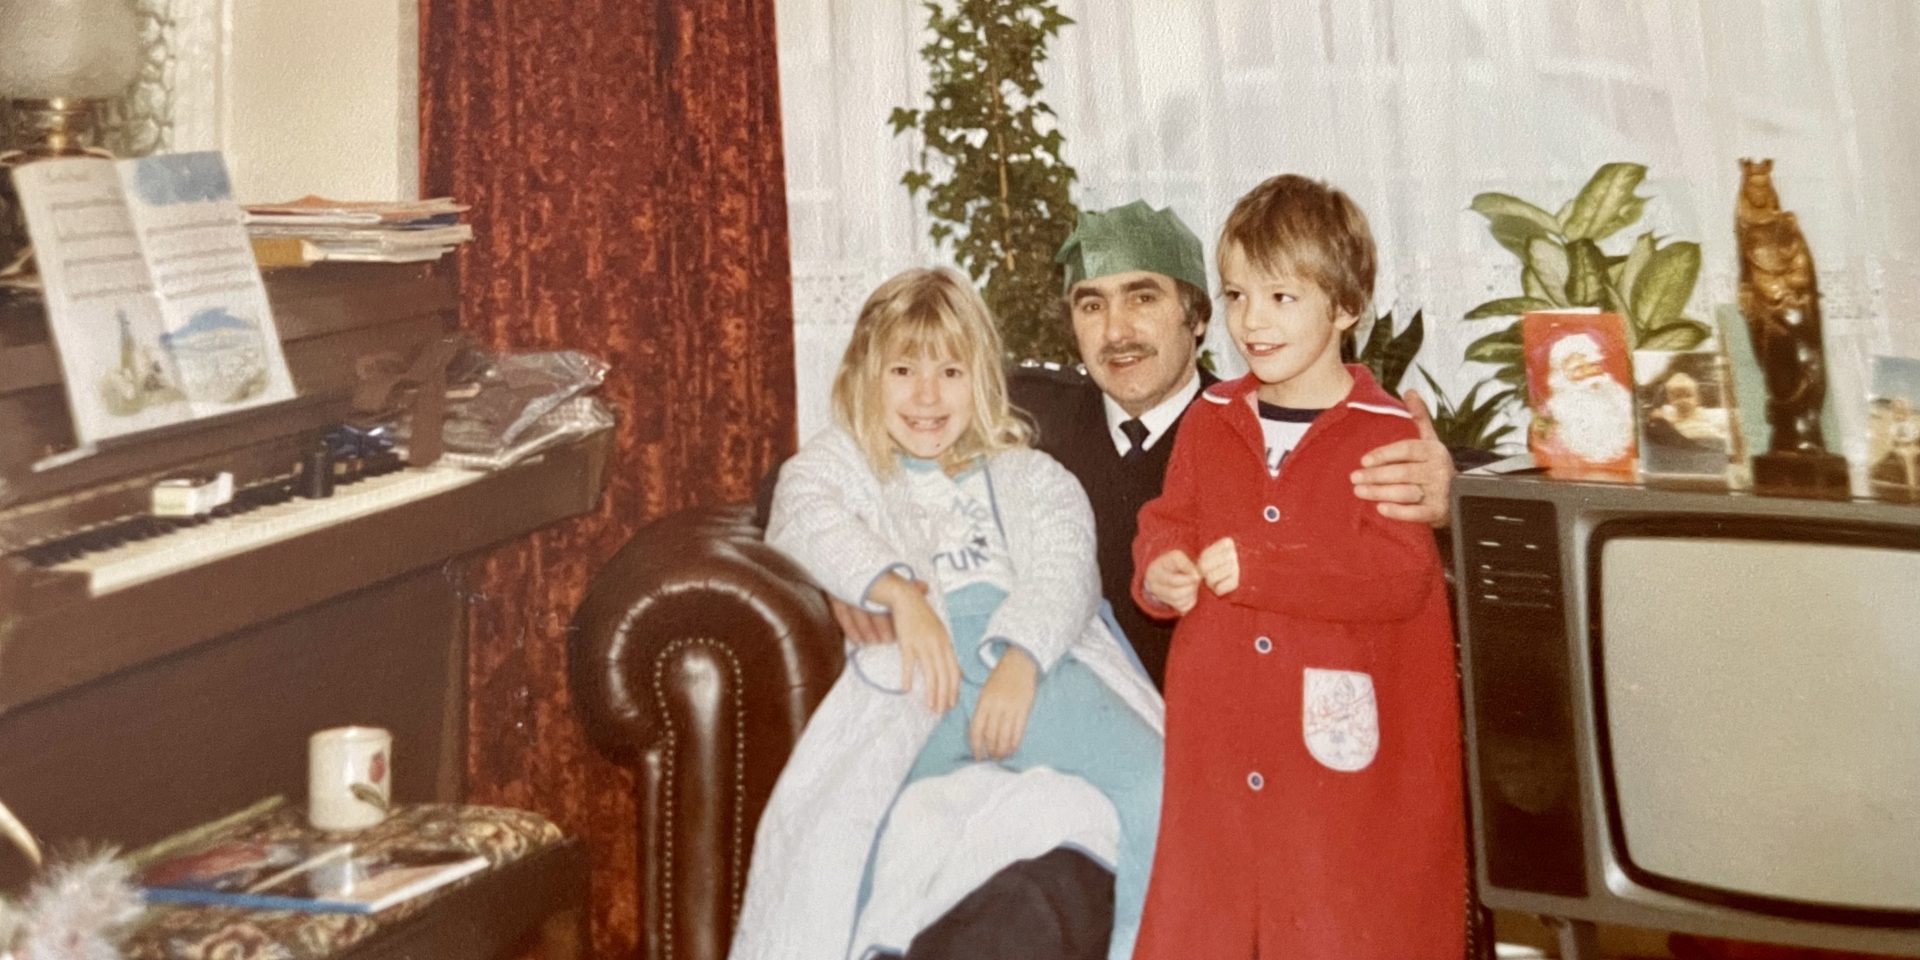 A photograph depicting Mel, her dad, and brother taken at Christmas in 1984